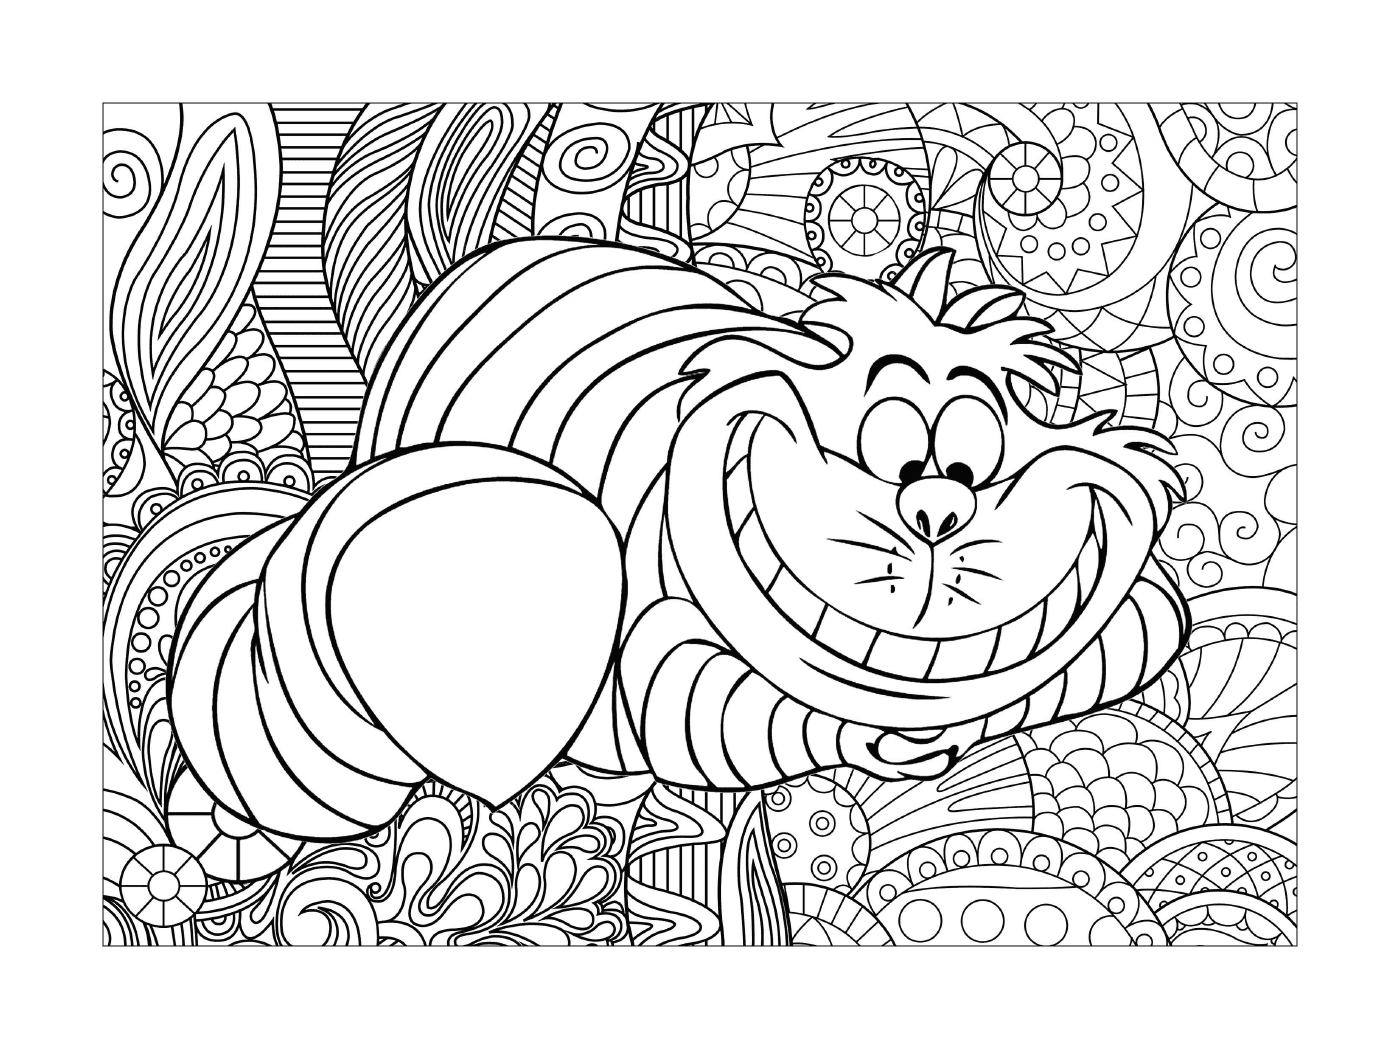  A Cheshire cat from Alice in Wonderland 